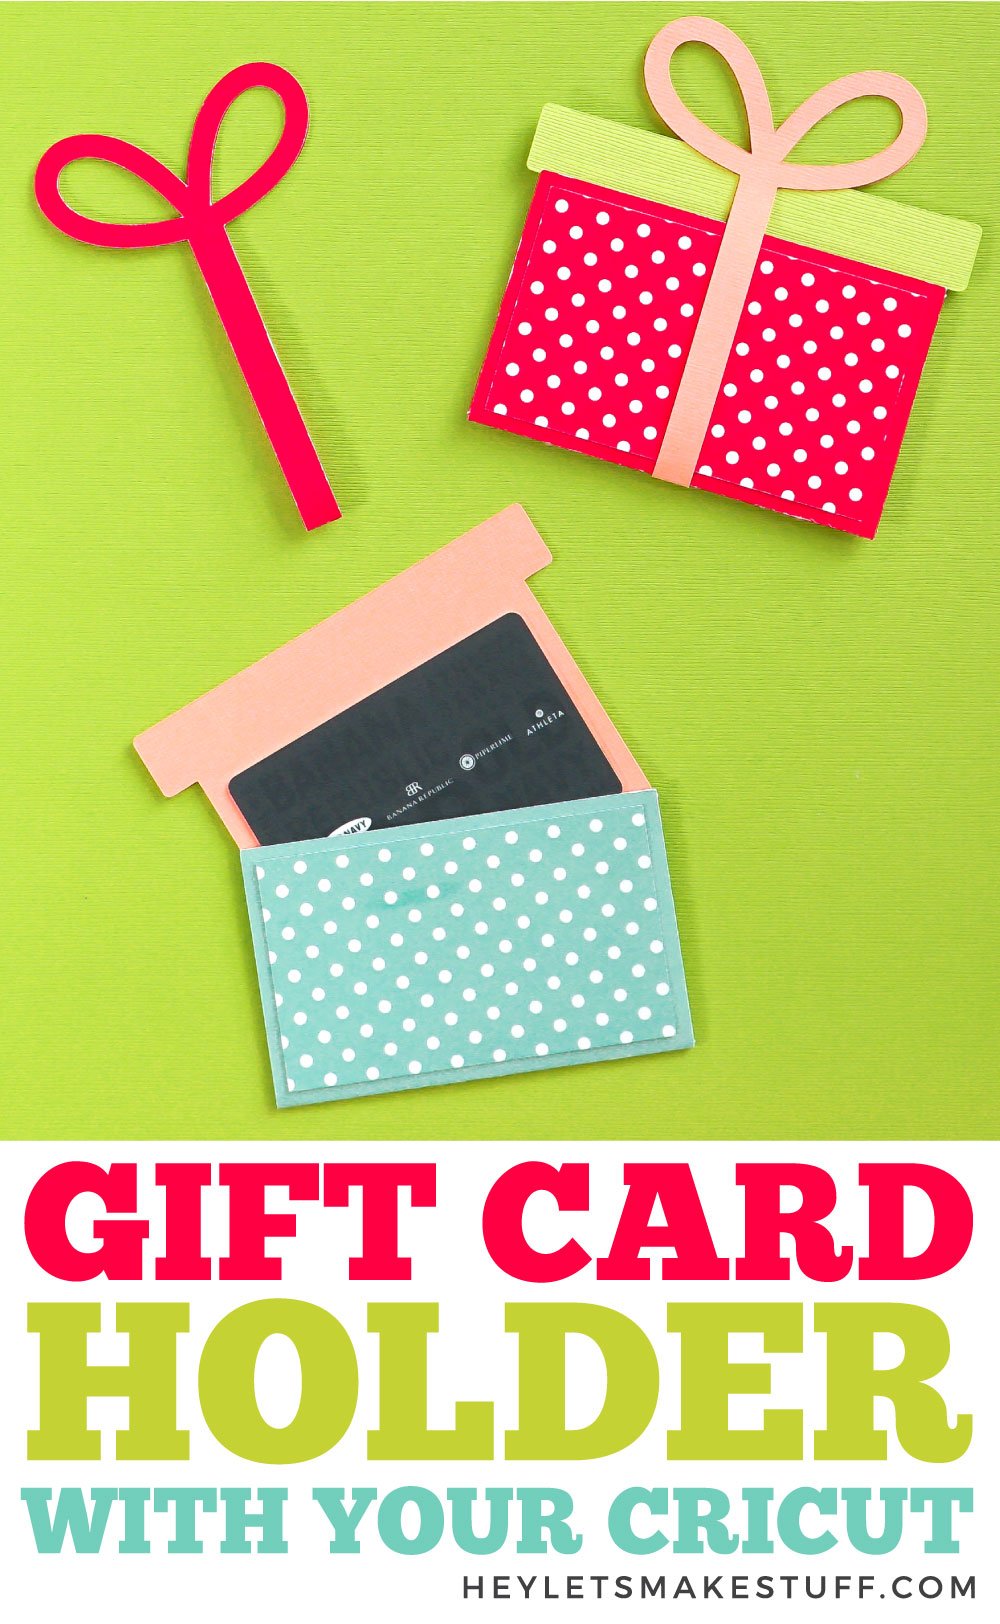 DIY Gift Card Holder with the Cricut Hey Let #39 s Make Stuff